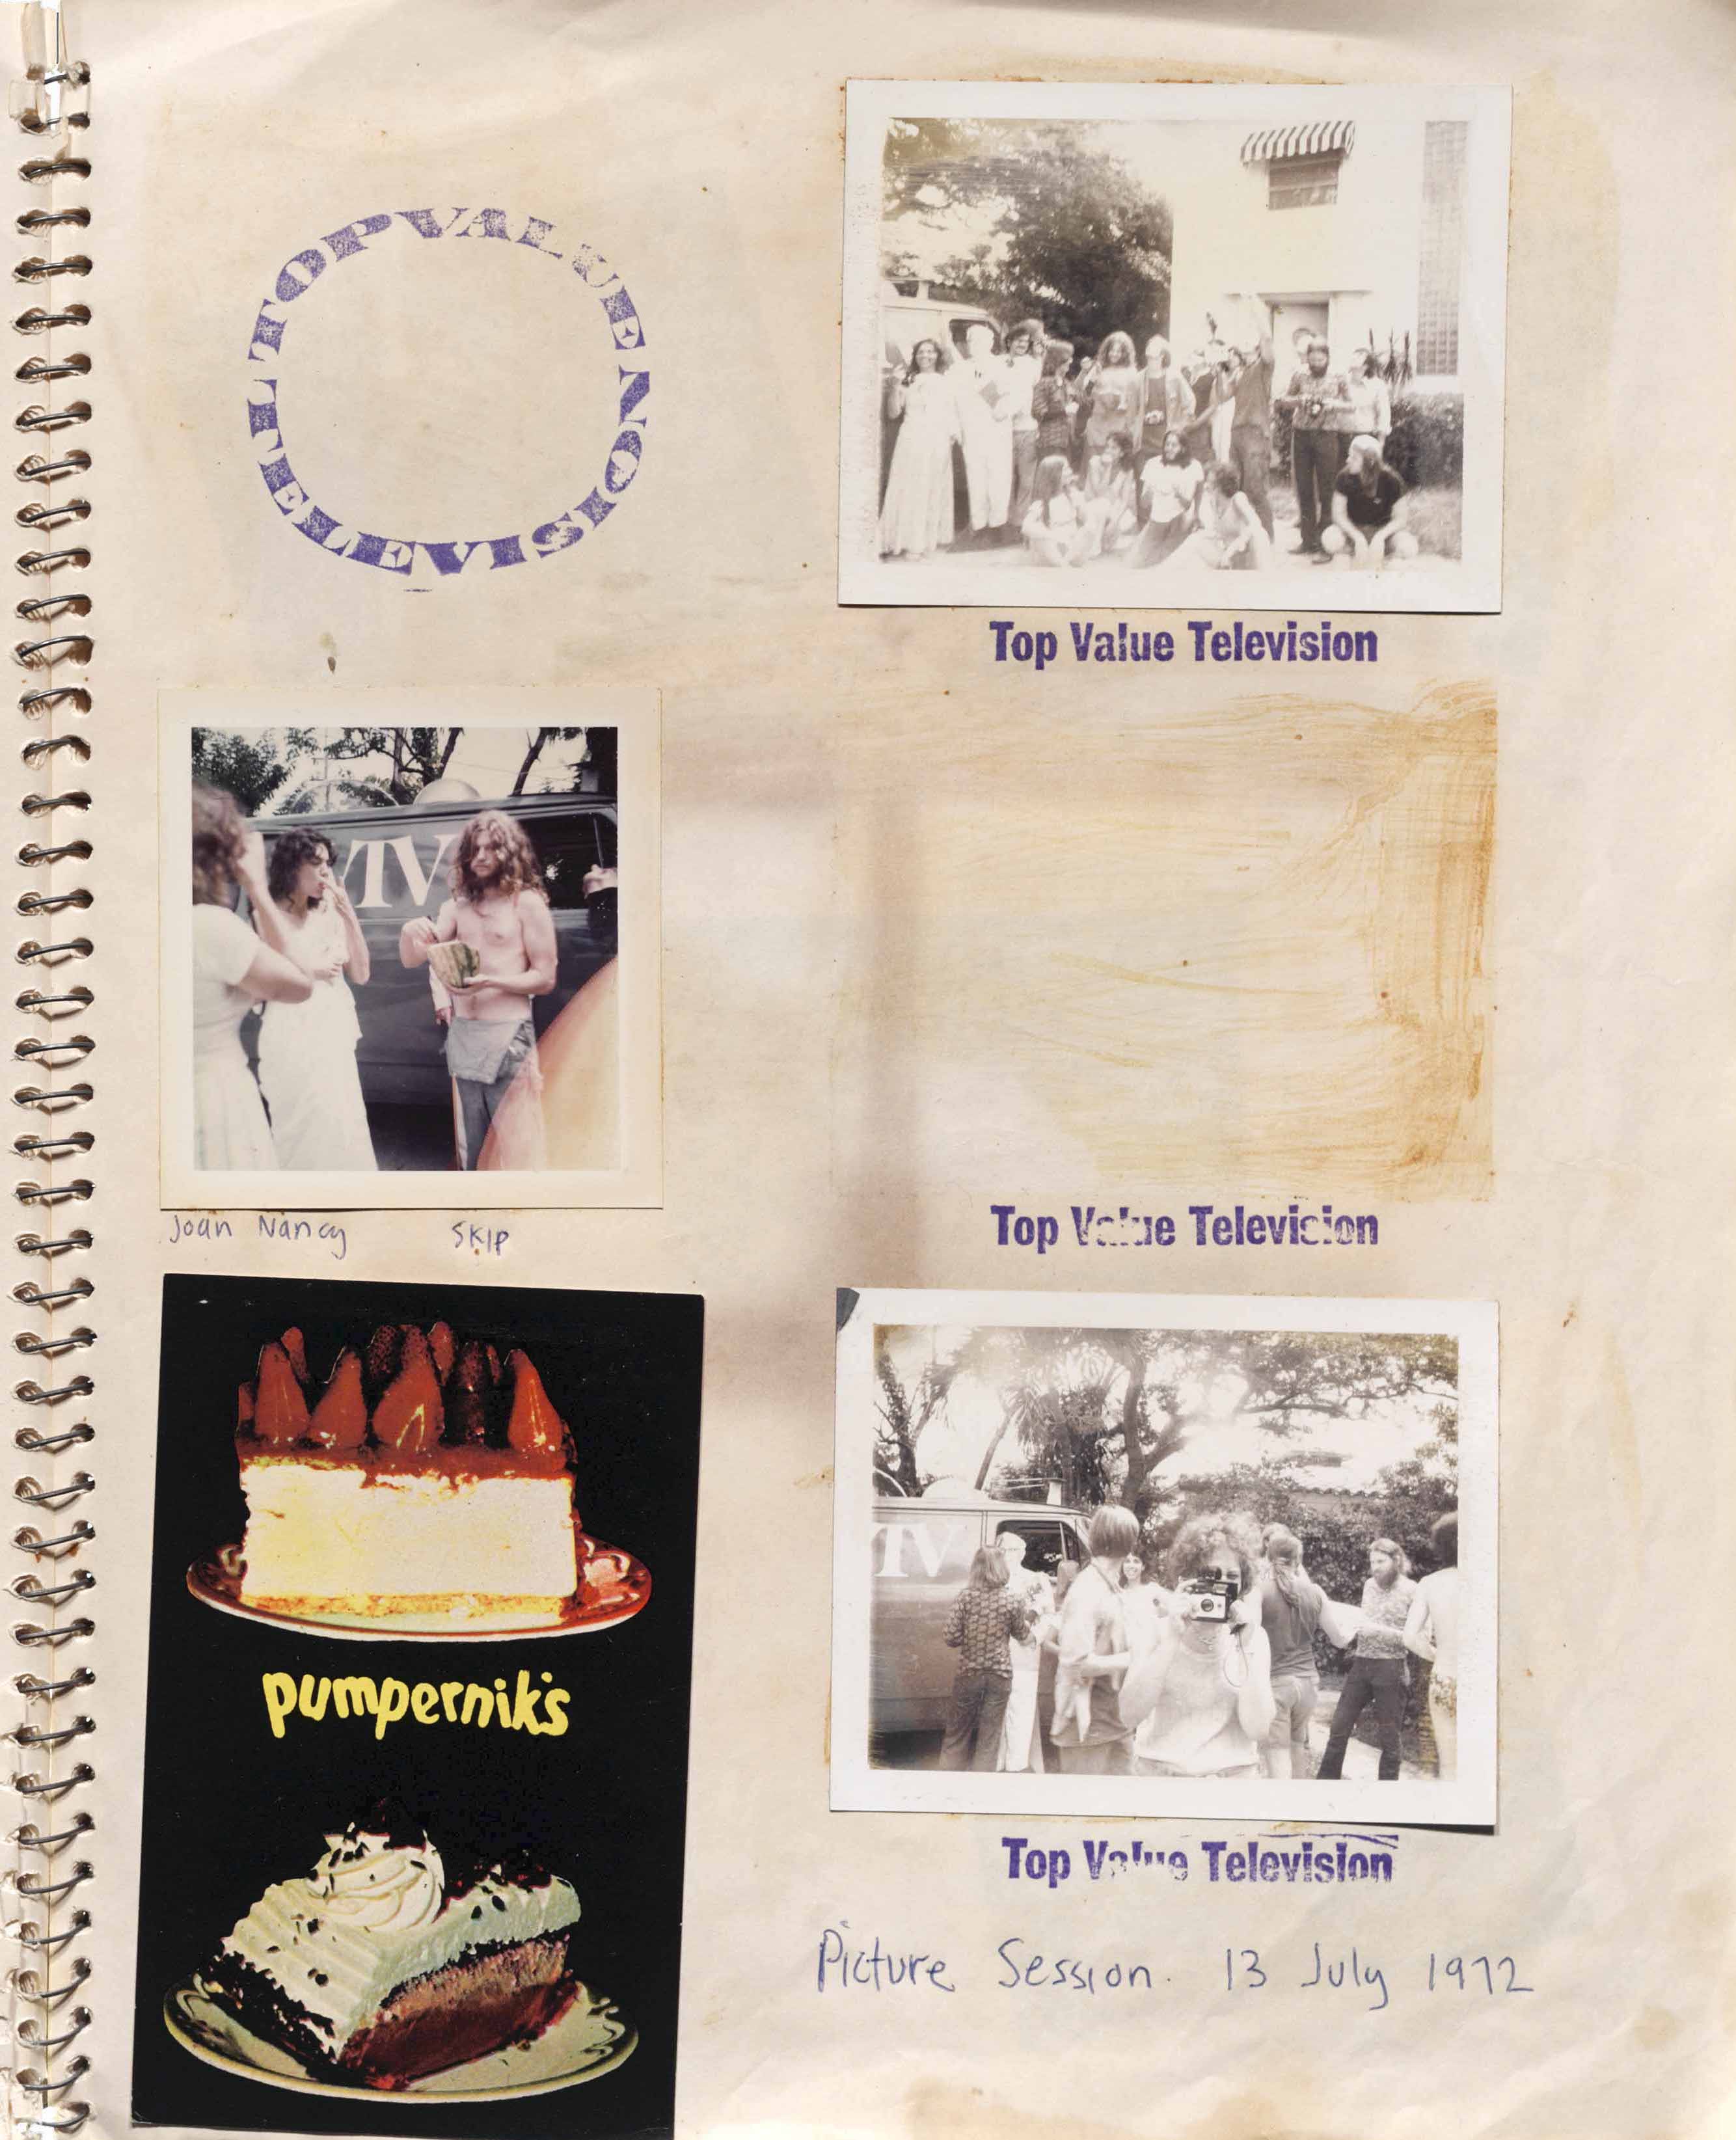 page from TVTV's production scrapbook for The World's Largest TV Studio